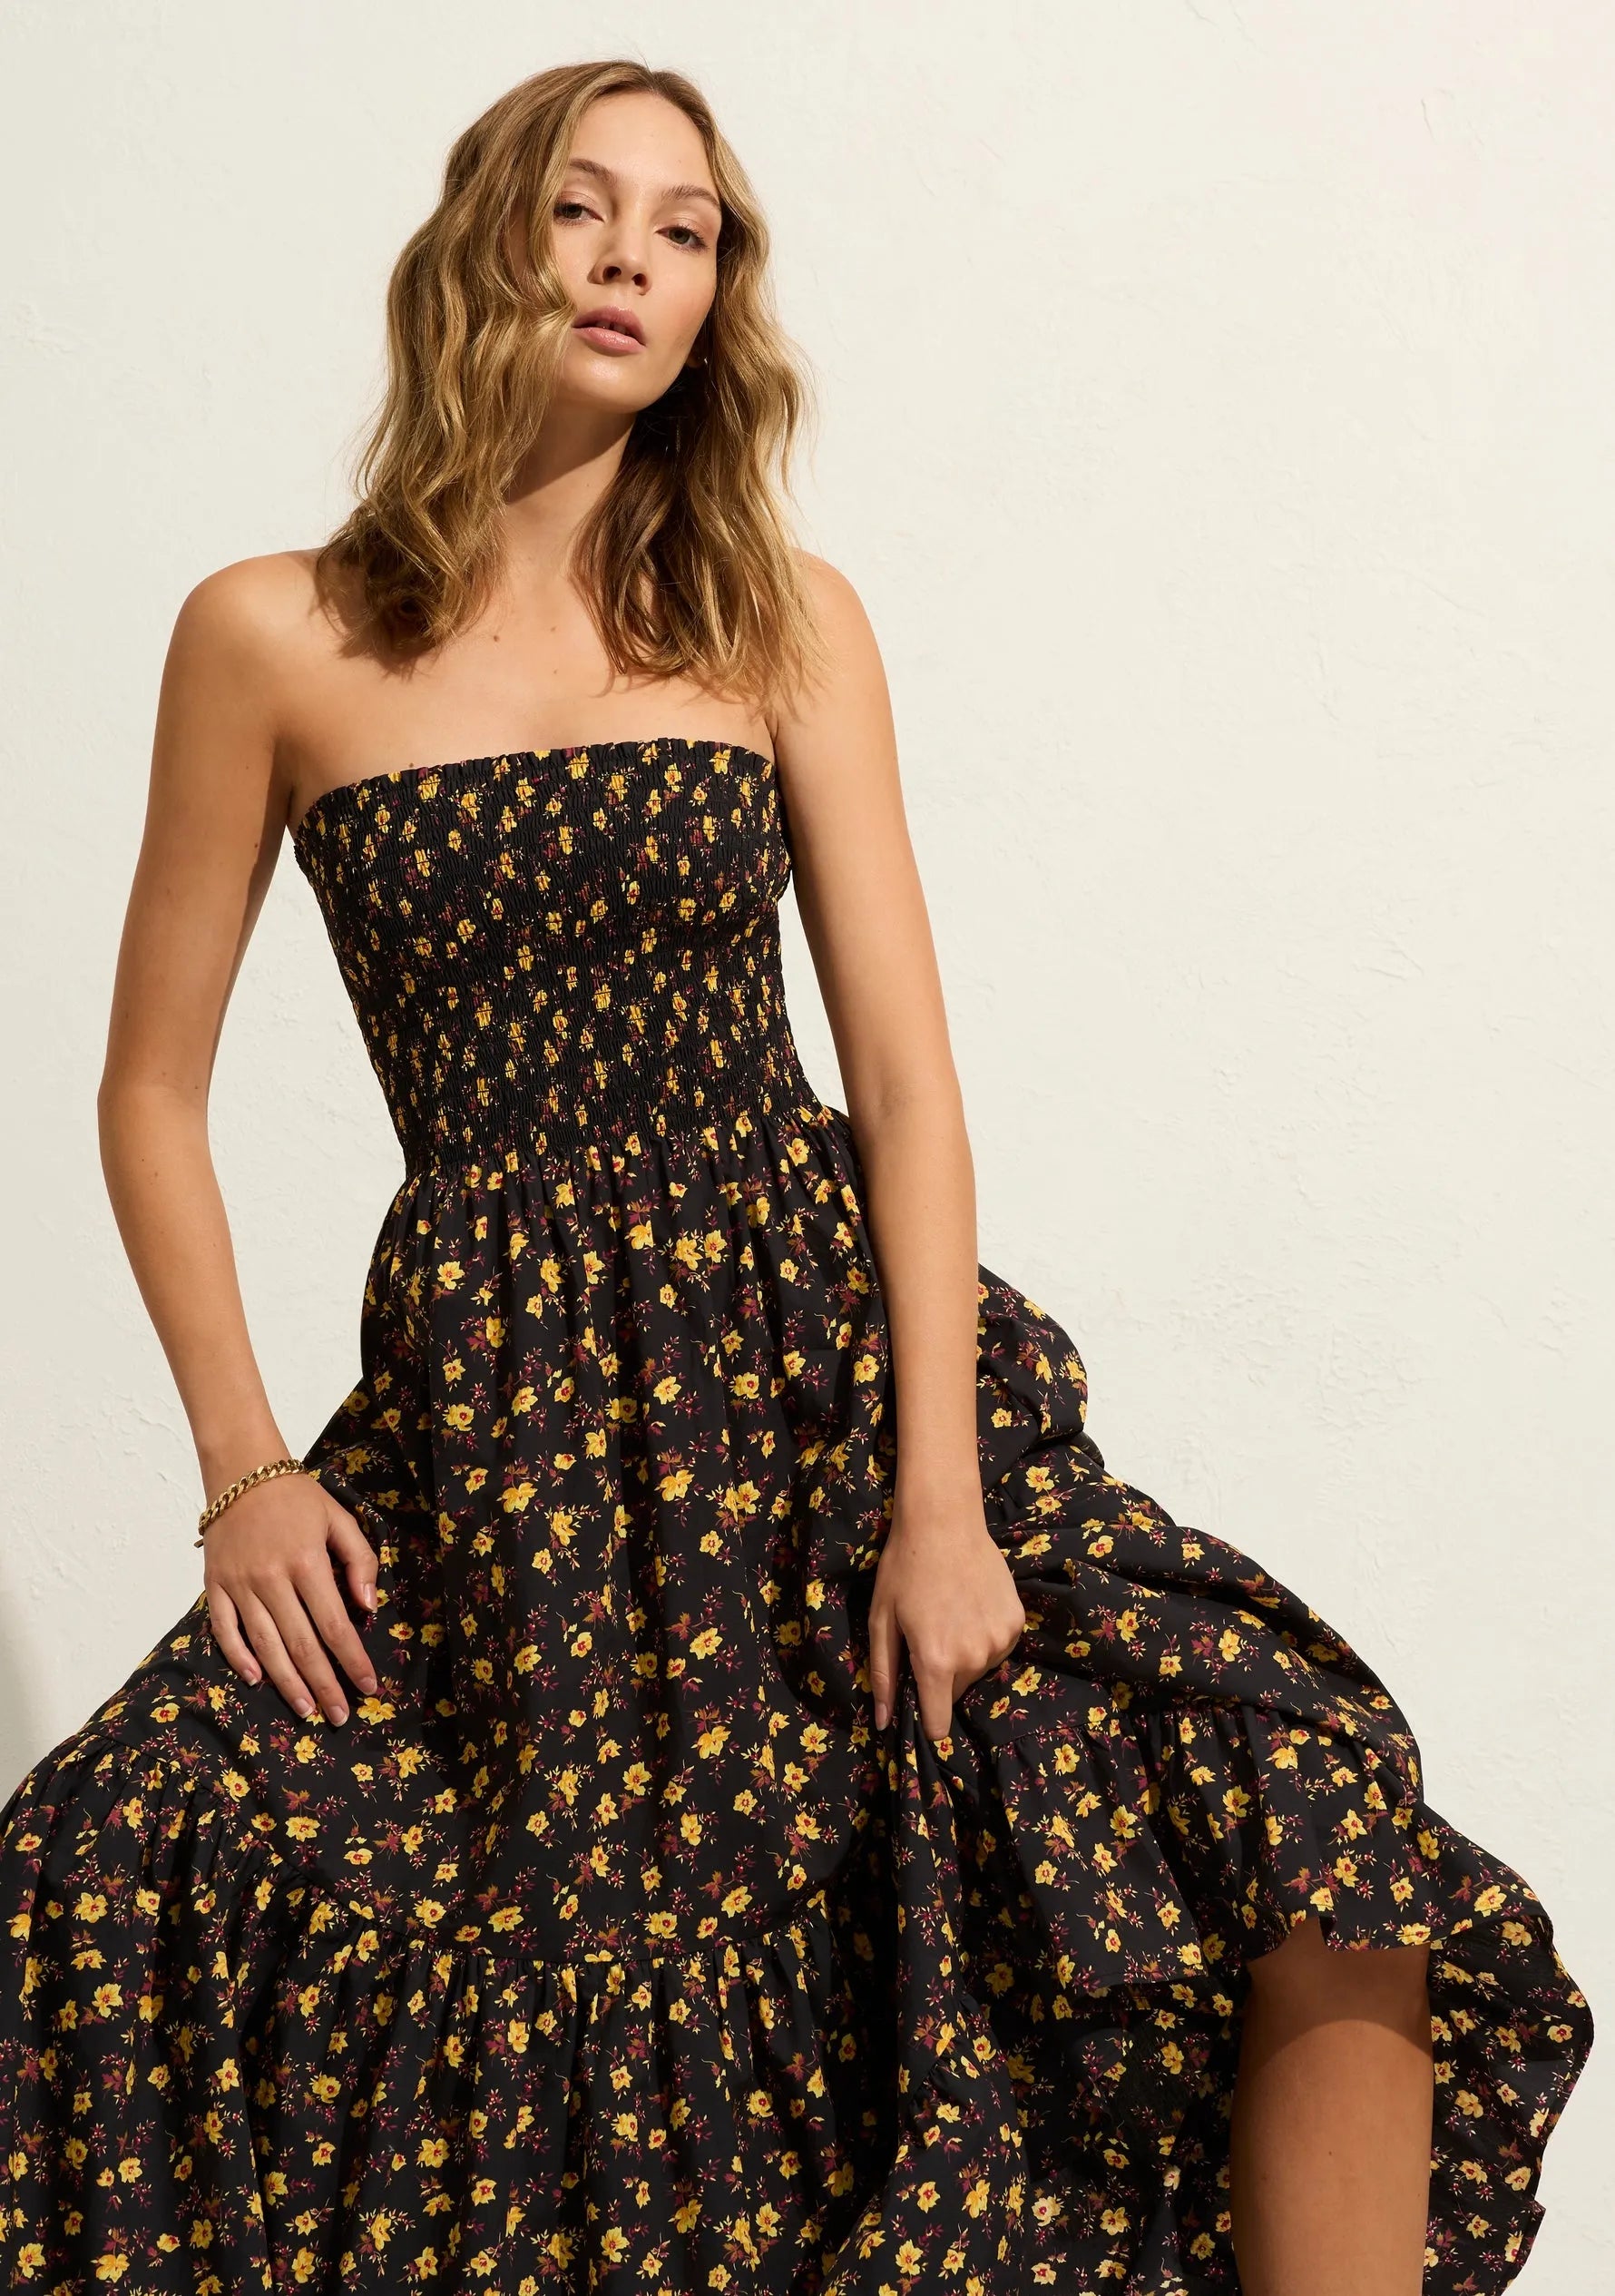 Auguste The Label | Anthea Maxi Dress